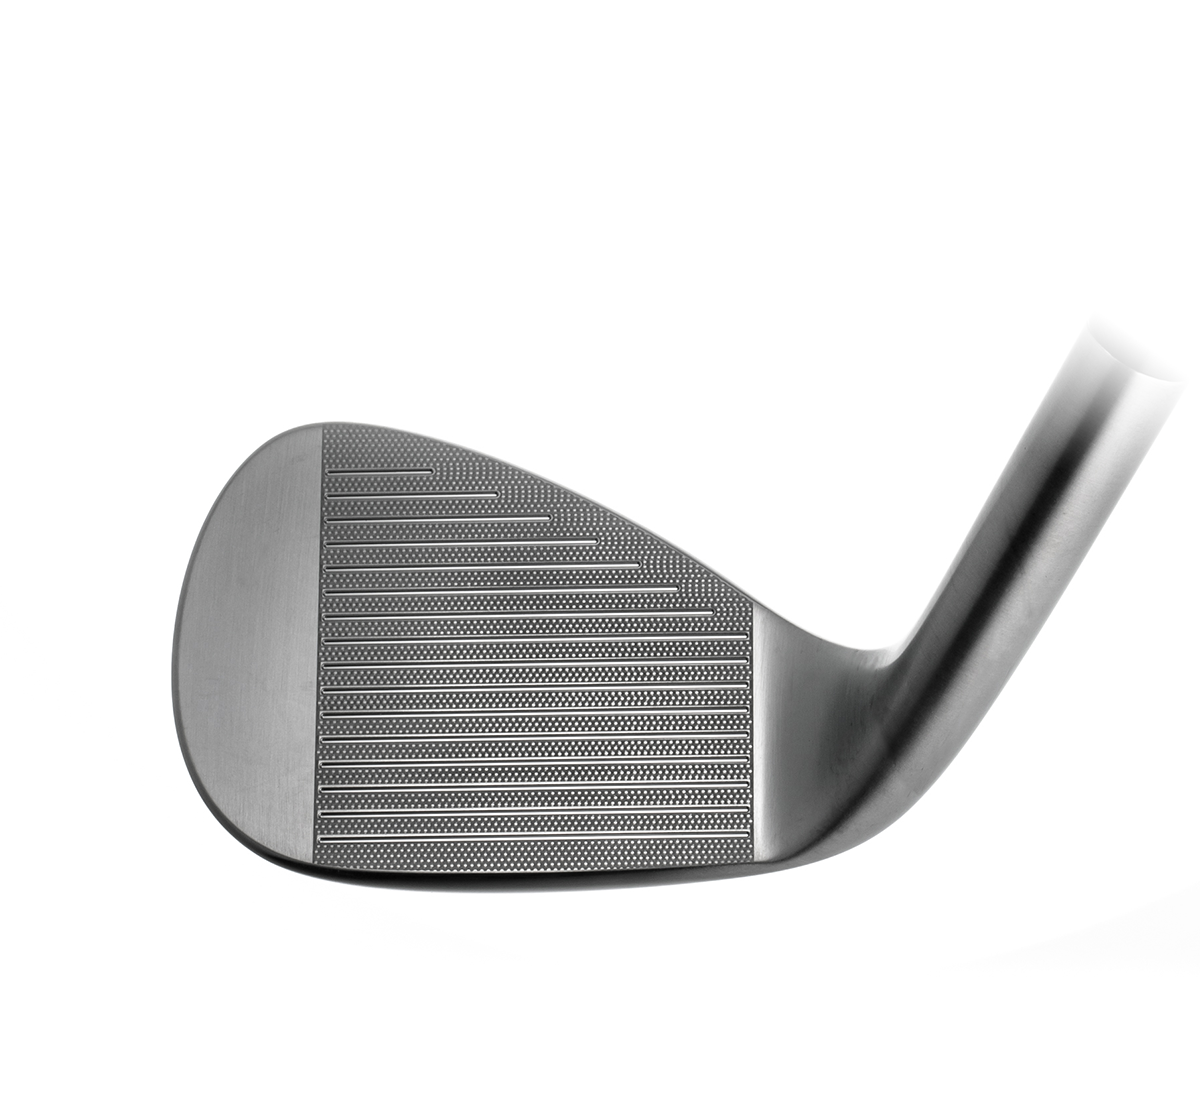 FORGED WEDGE